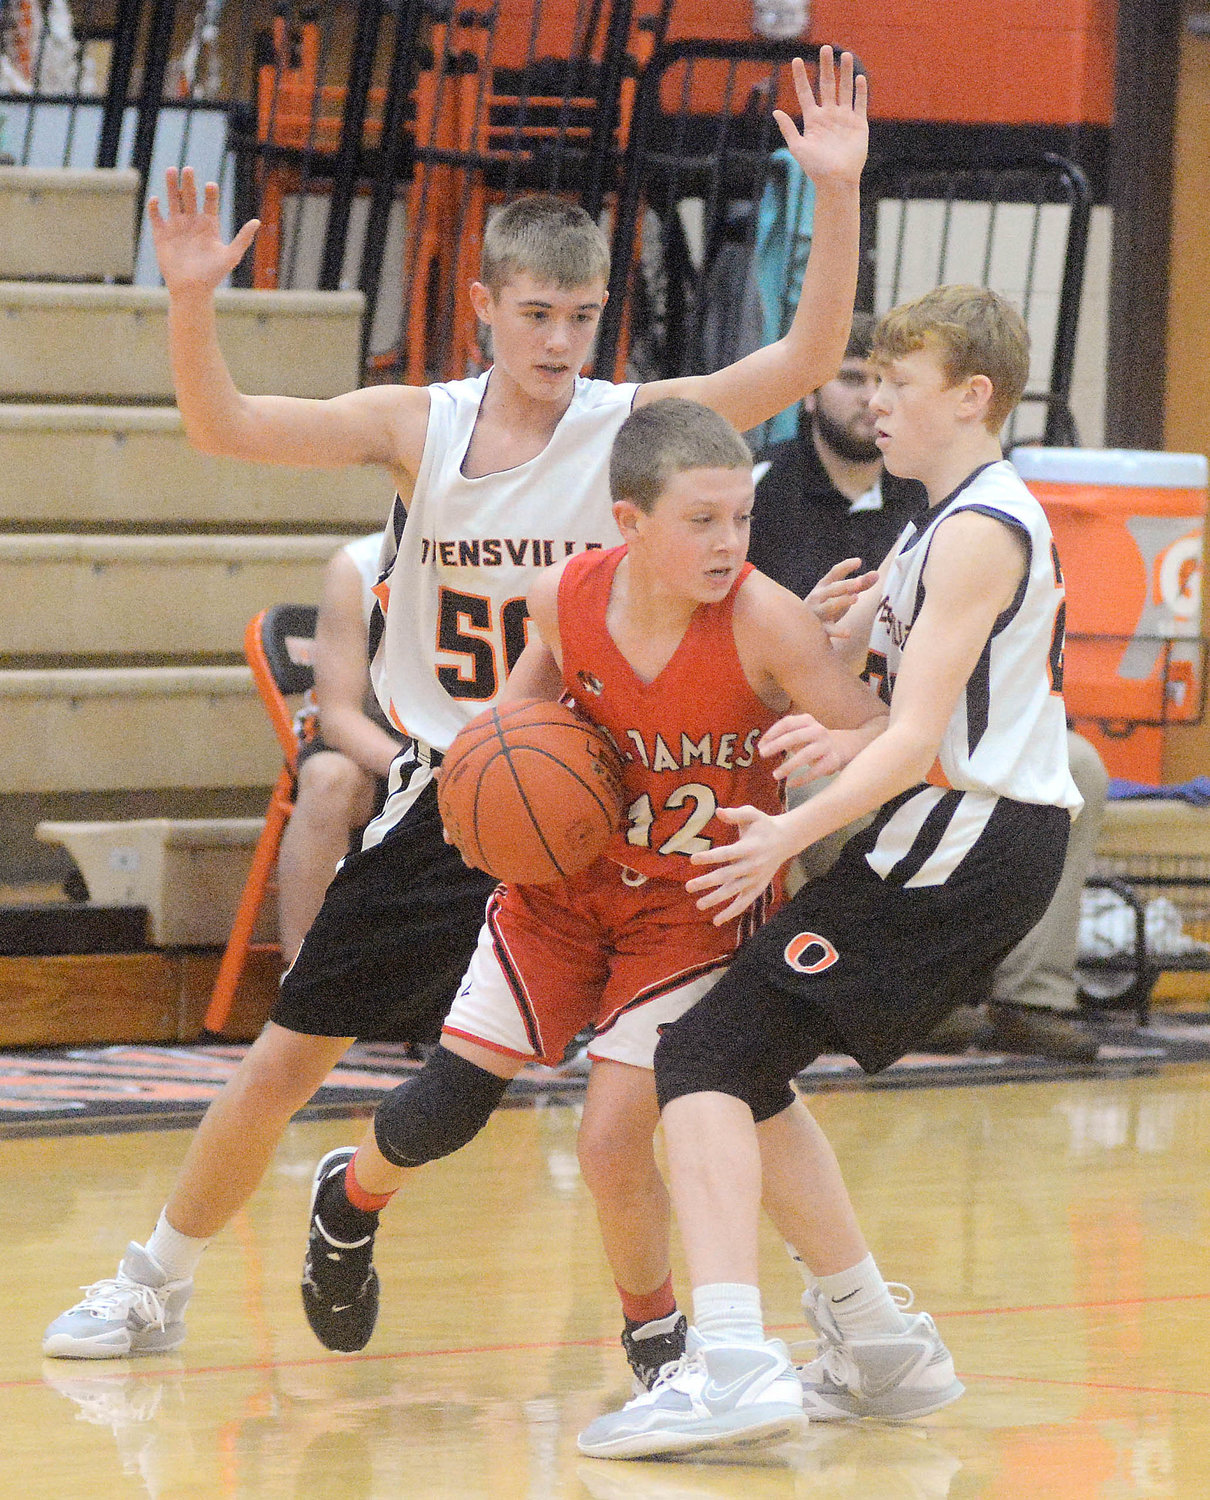 Bryce Kramme (eft) and Kylen Menz (right) trap a St. James ball handler during last Wednesday’s daytime middle school boys basketball doubleheader between the host Owensville Dutchmen and visiting St. James Tigers.